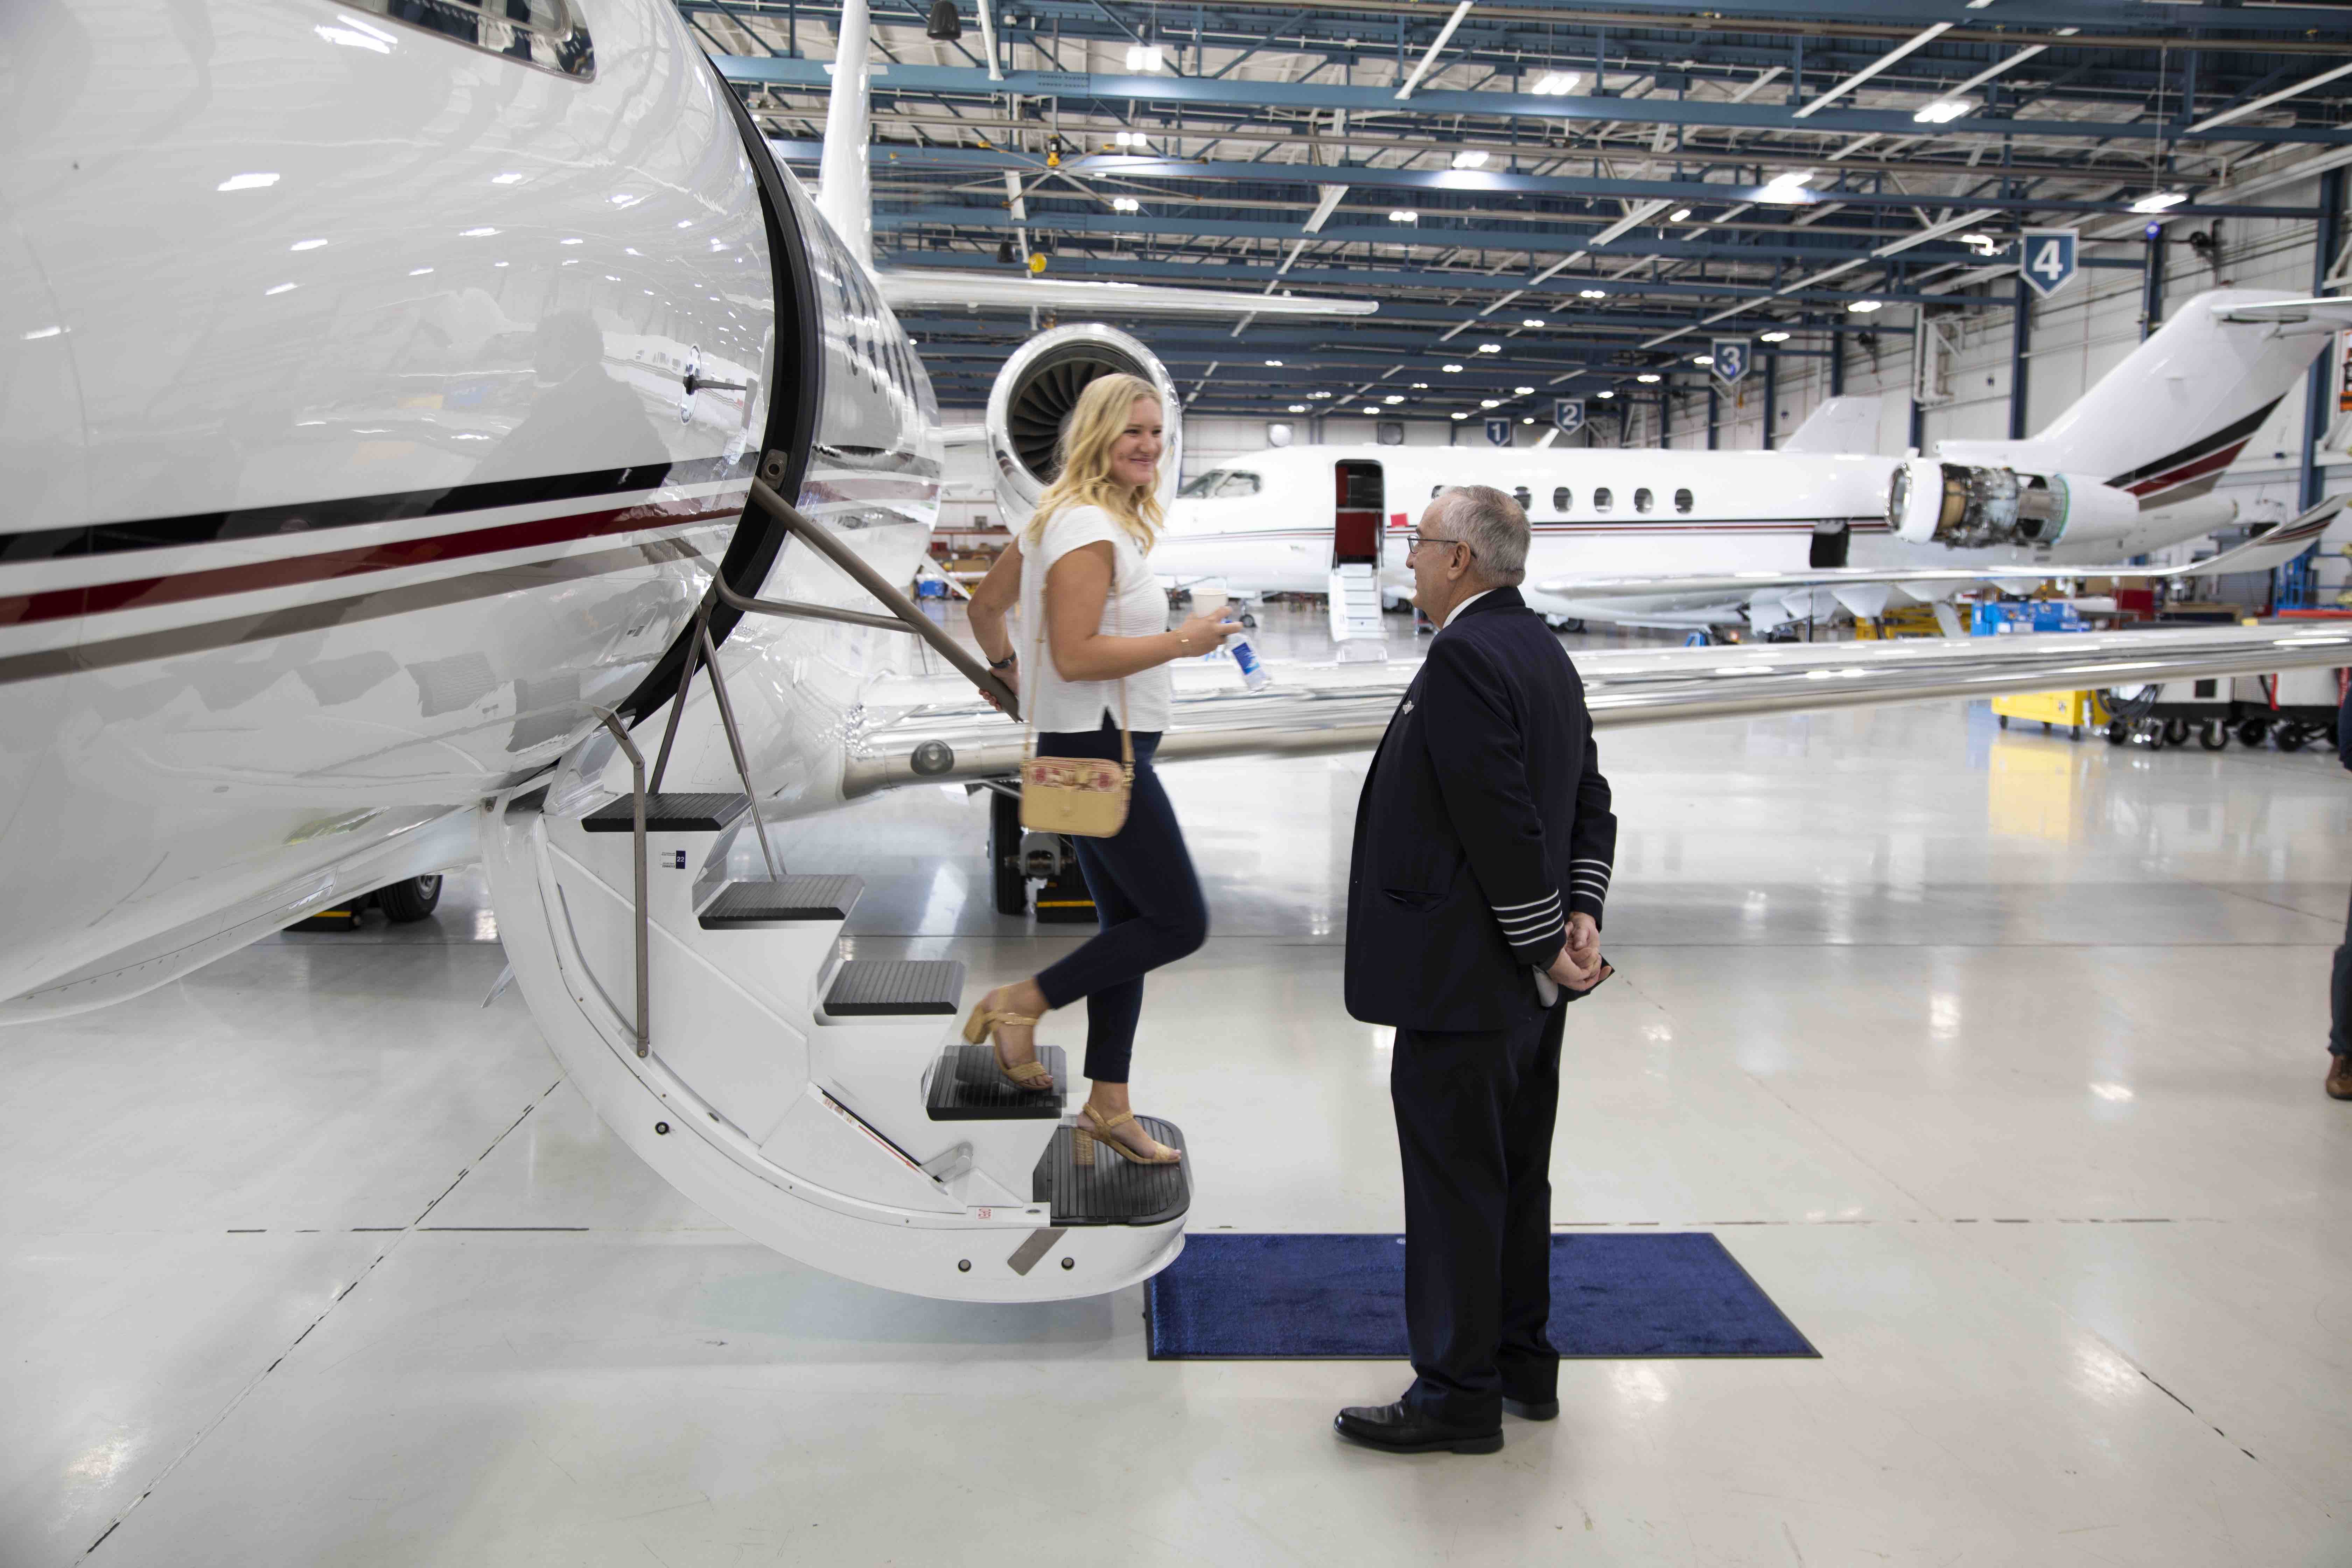 Woman stepping down from NetJet airplain in hanger with pilot